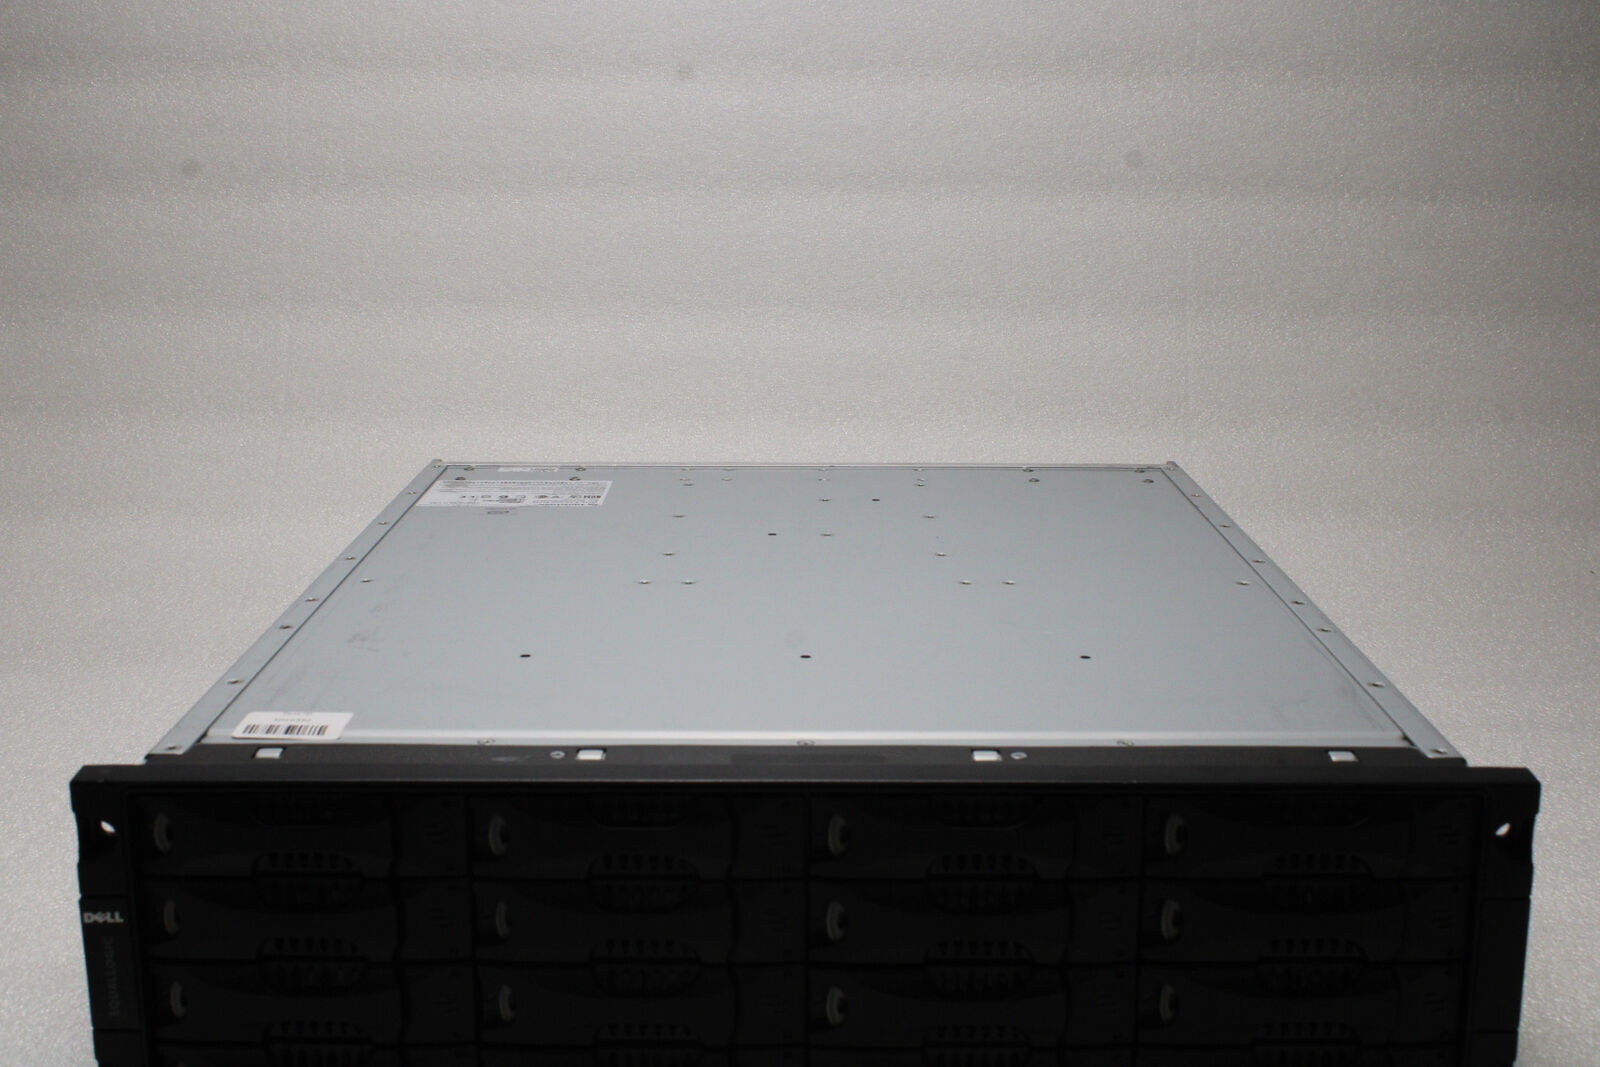 Dell EqualLogic PS3000 Storage Array SAN Array 2 Controllers 2x PSU COMPLETE